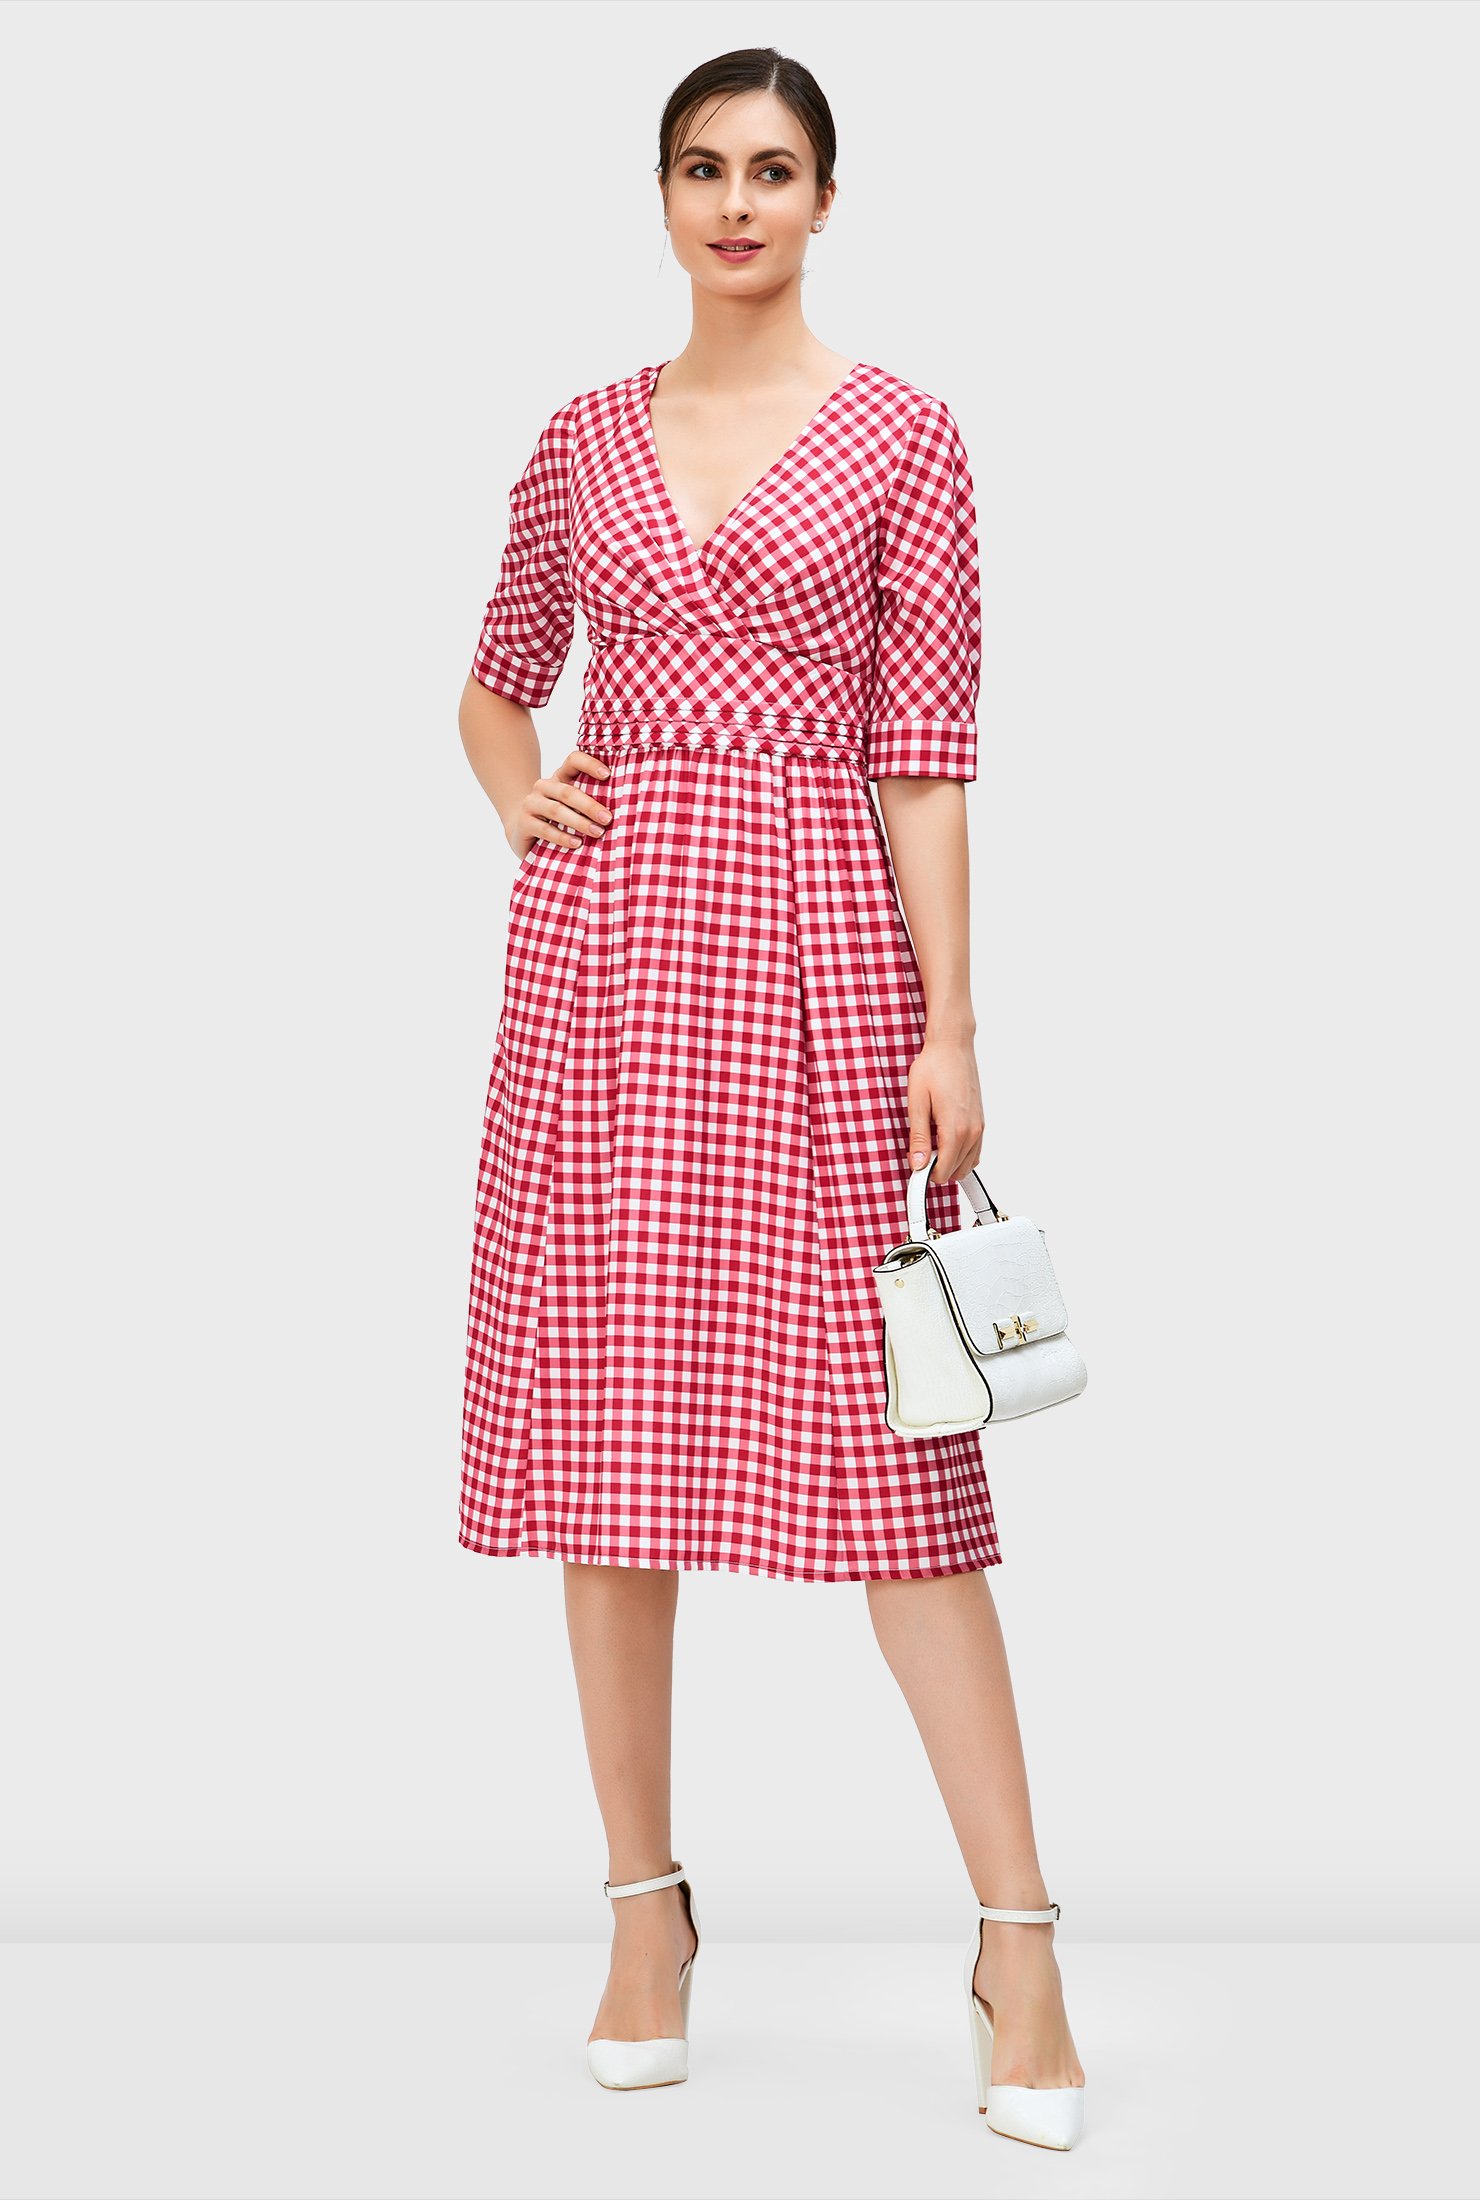 The summer dress refresh! Our gingham check print crepe dress is styled with a surplice bodice and pleated empire waist that flares out to a ruched pleat full skirt.